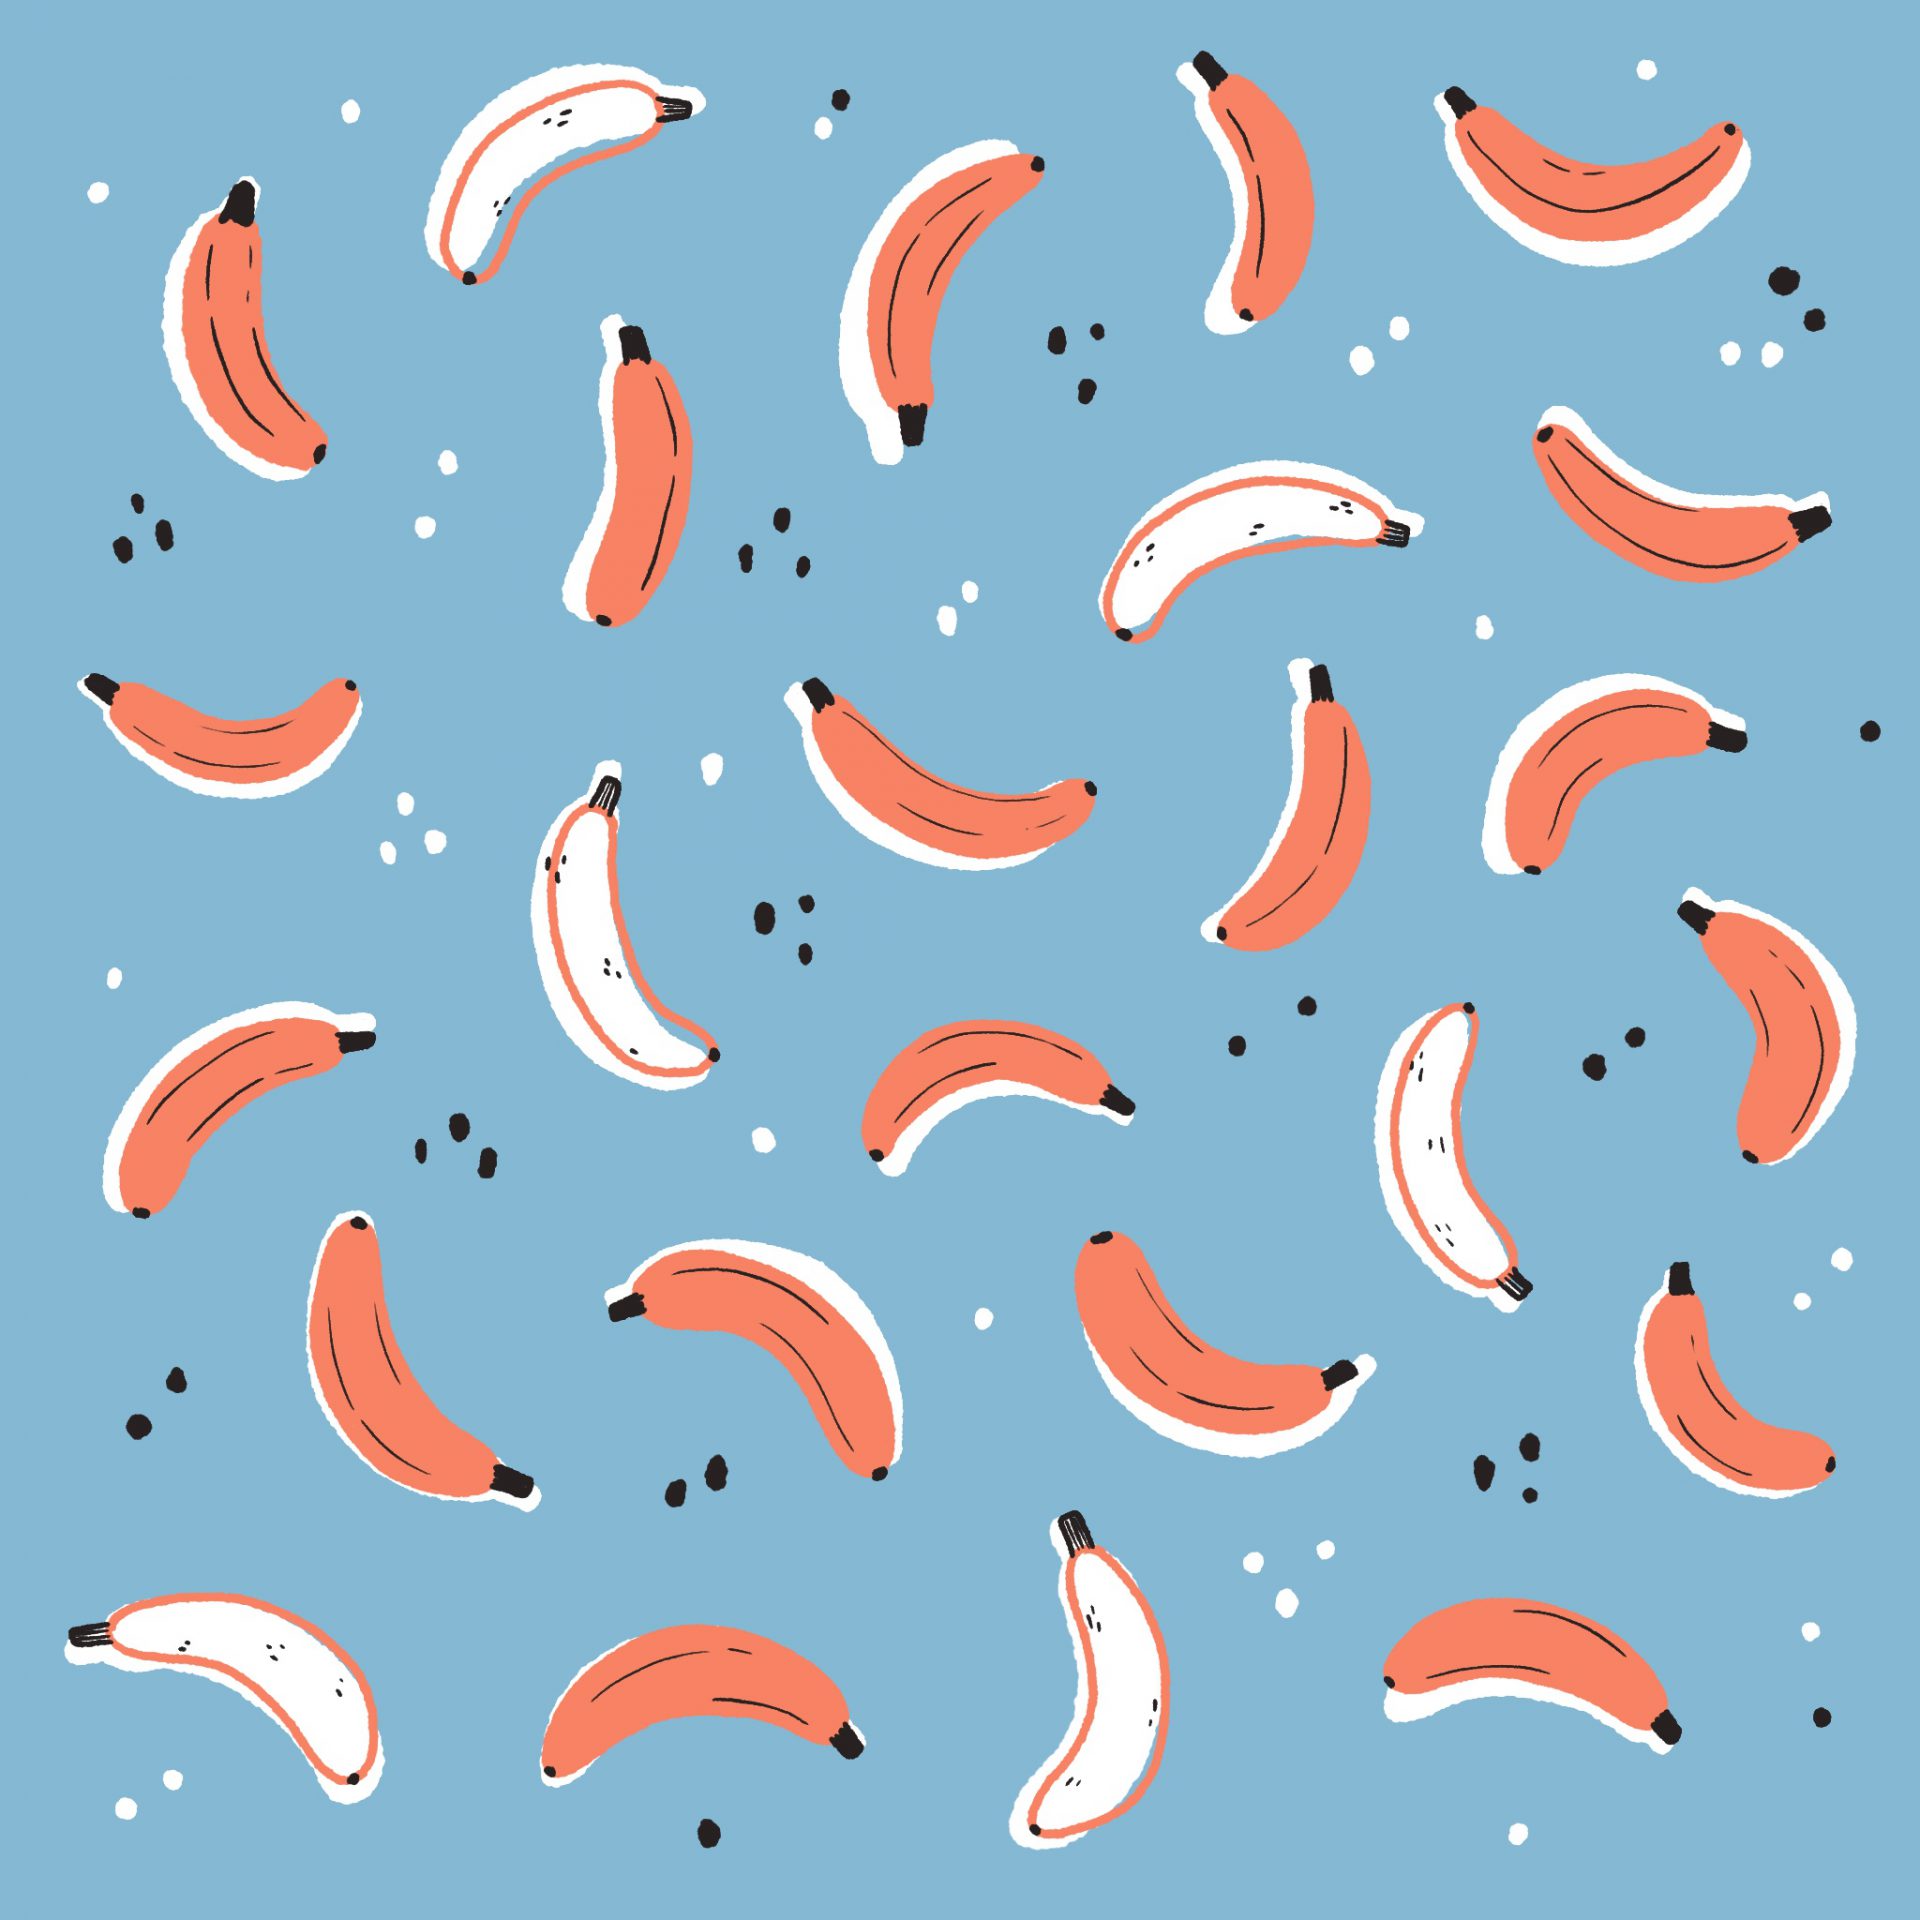 An illustrated blue and orange banana pattern